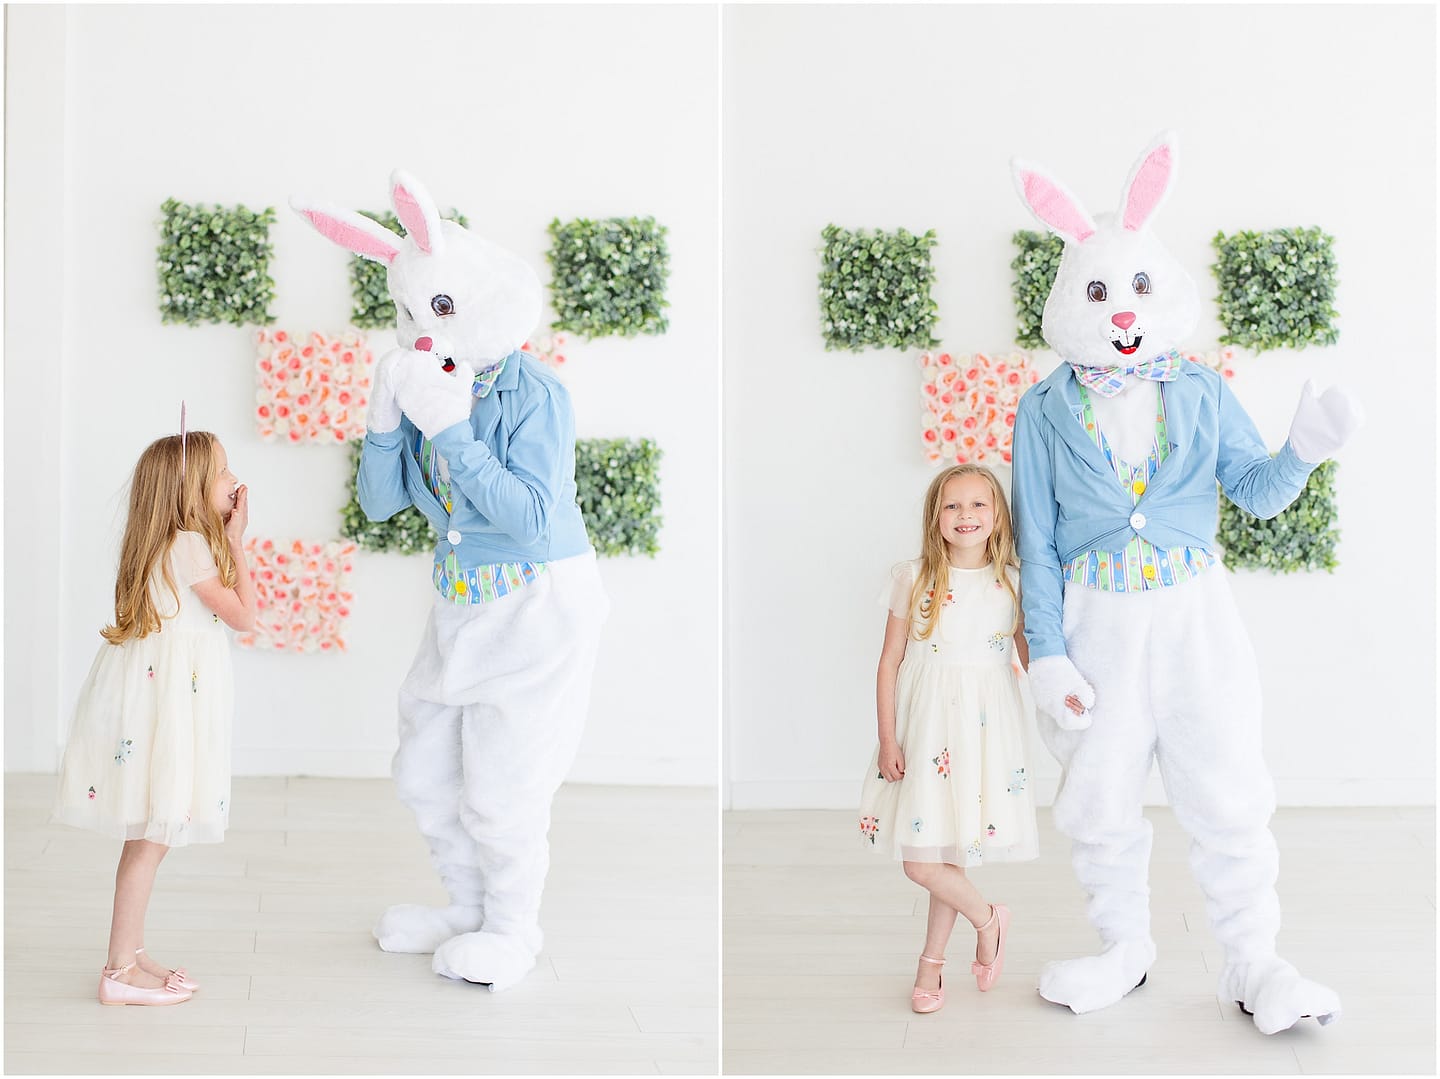 Little girl is surprised upon seeing the Easter Bunny at Boise studio session. Photo by Tiffany Hix Photography.